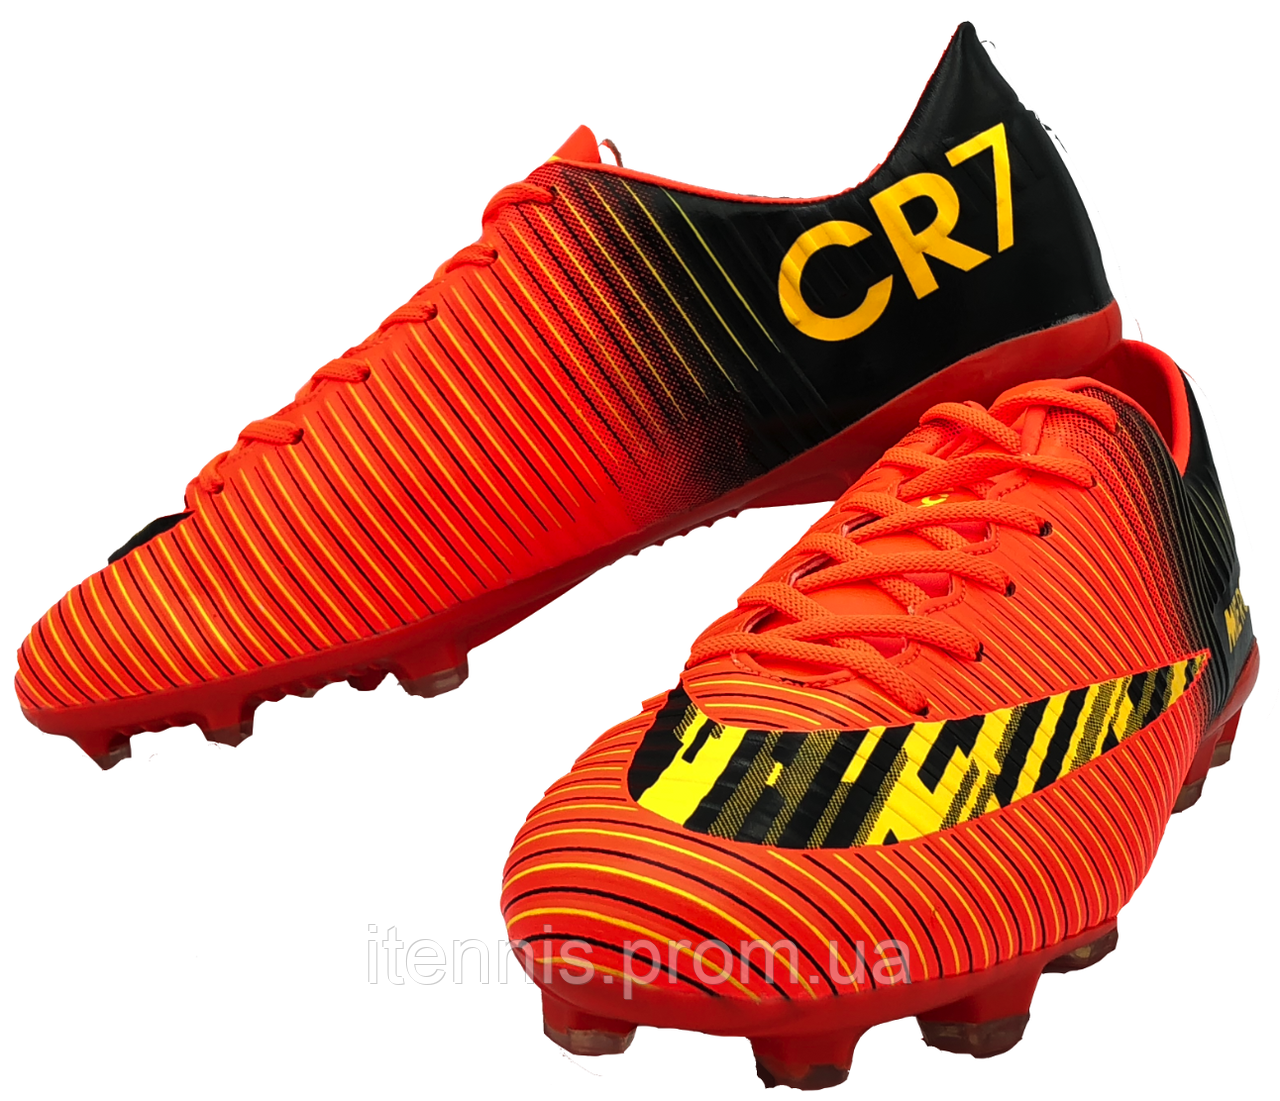 cr7 cleats 2018